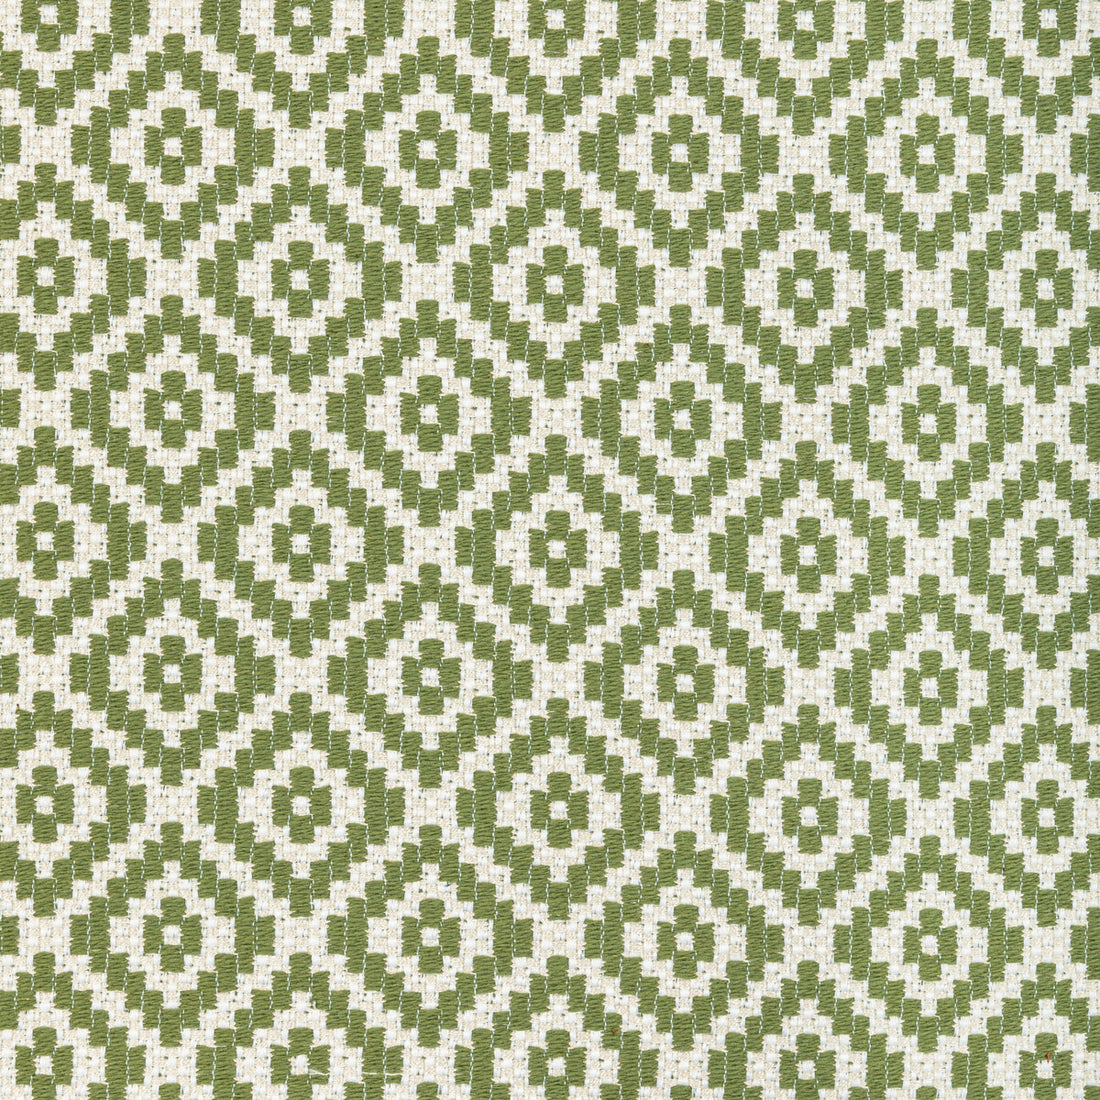 Kravet Design fabric in 36411-3 color - pattern 36411.3.0 - by Kravet Design in the Performance Crypton Home collection